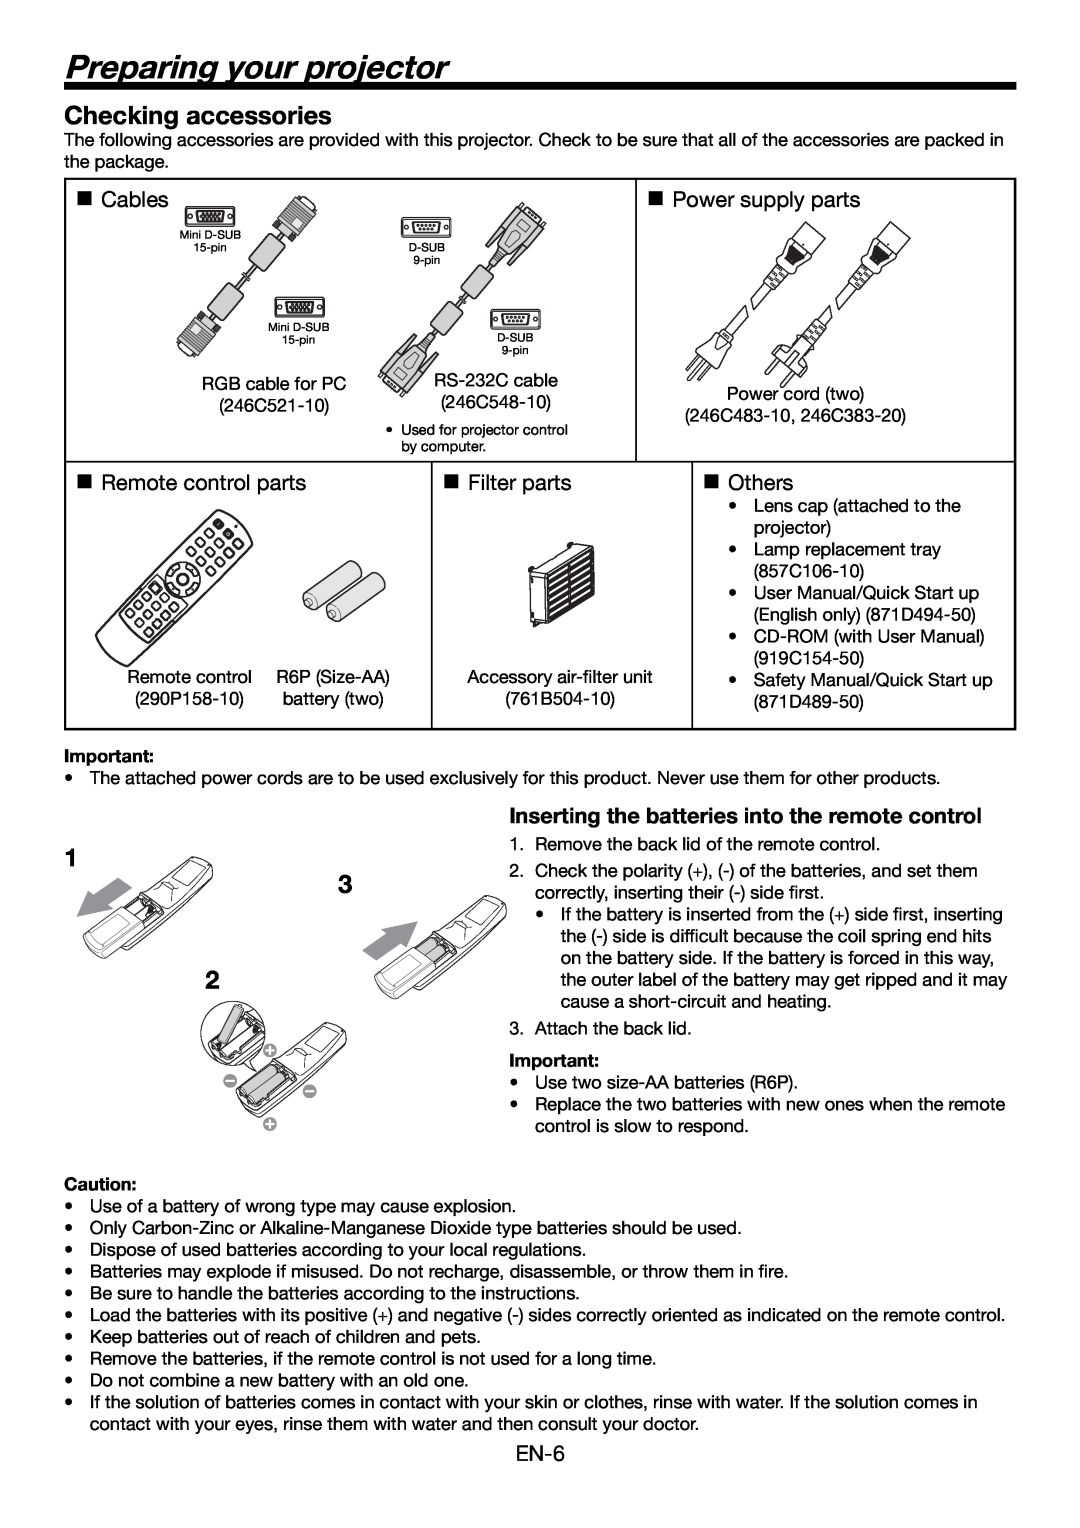 Mitsubishi Electronics HC6000 user manual Preparing your projector, Checking accessories 